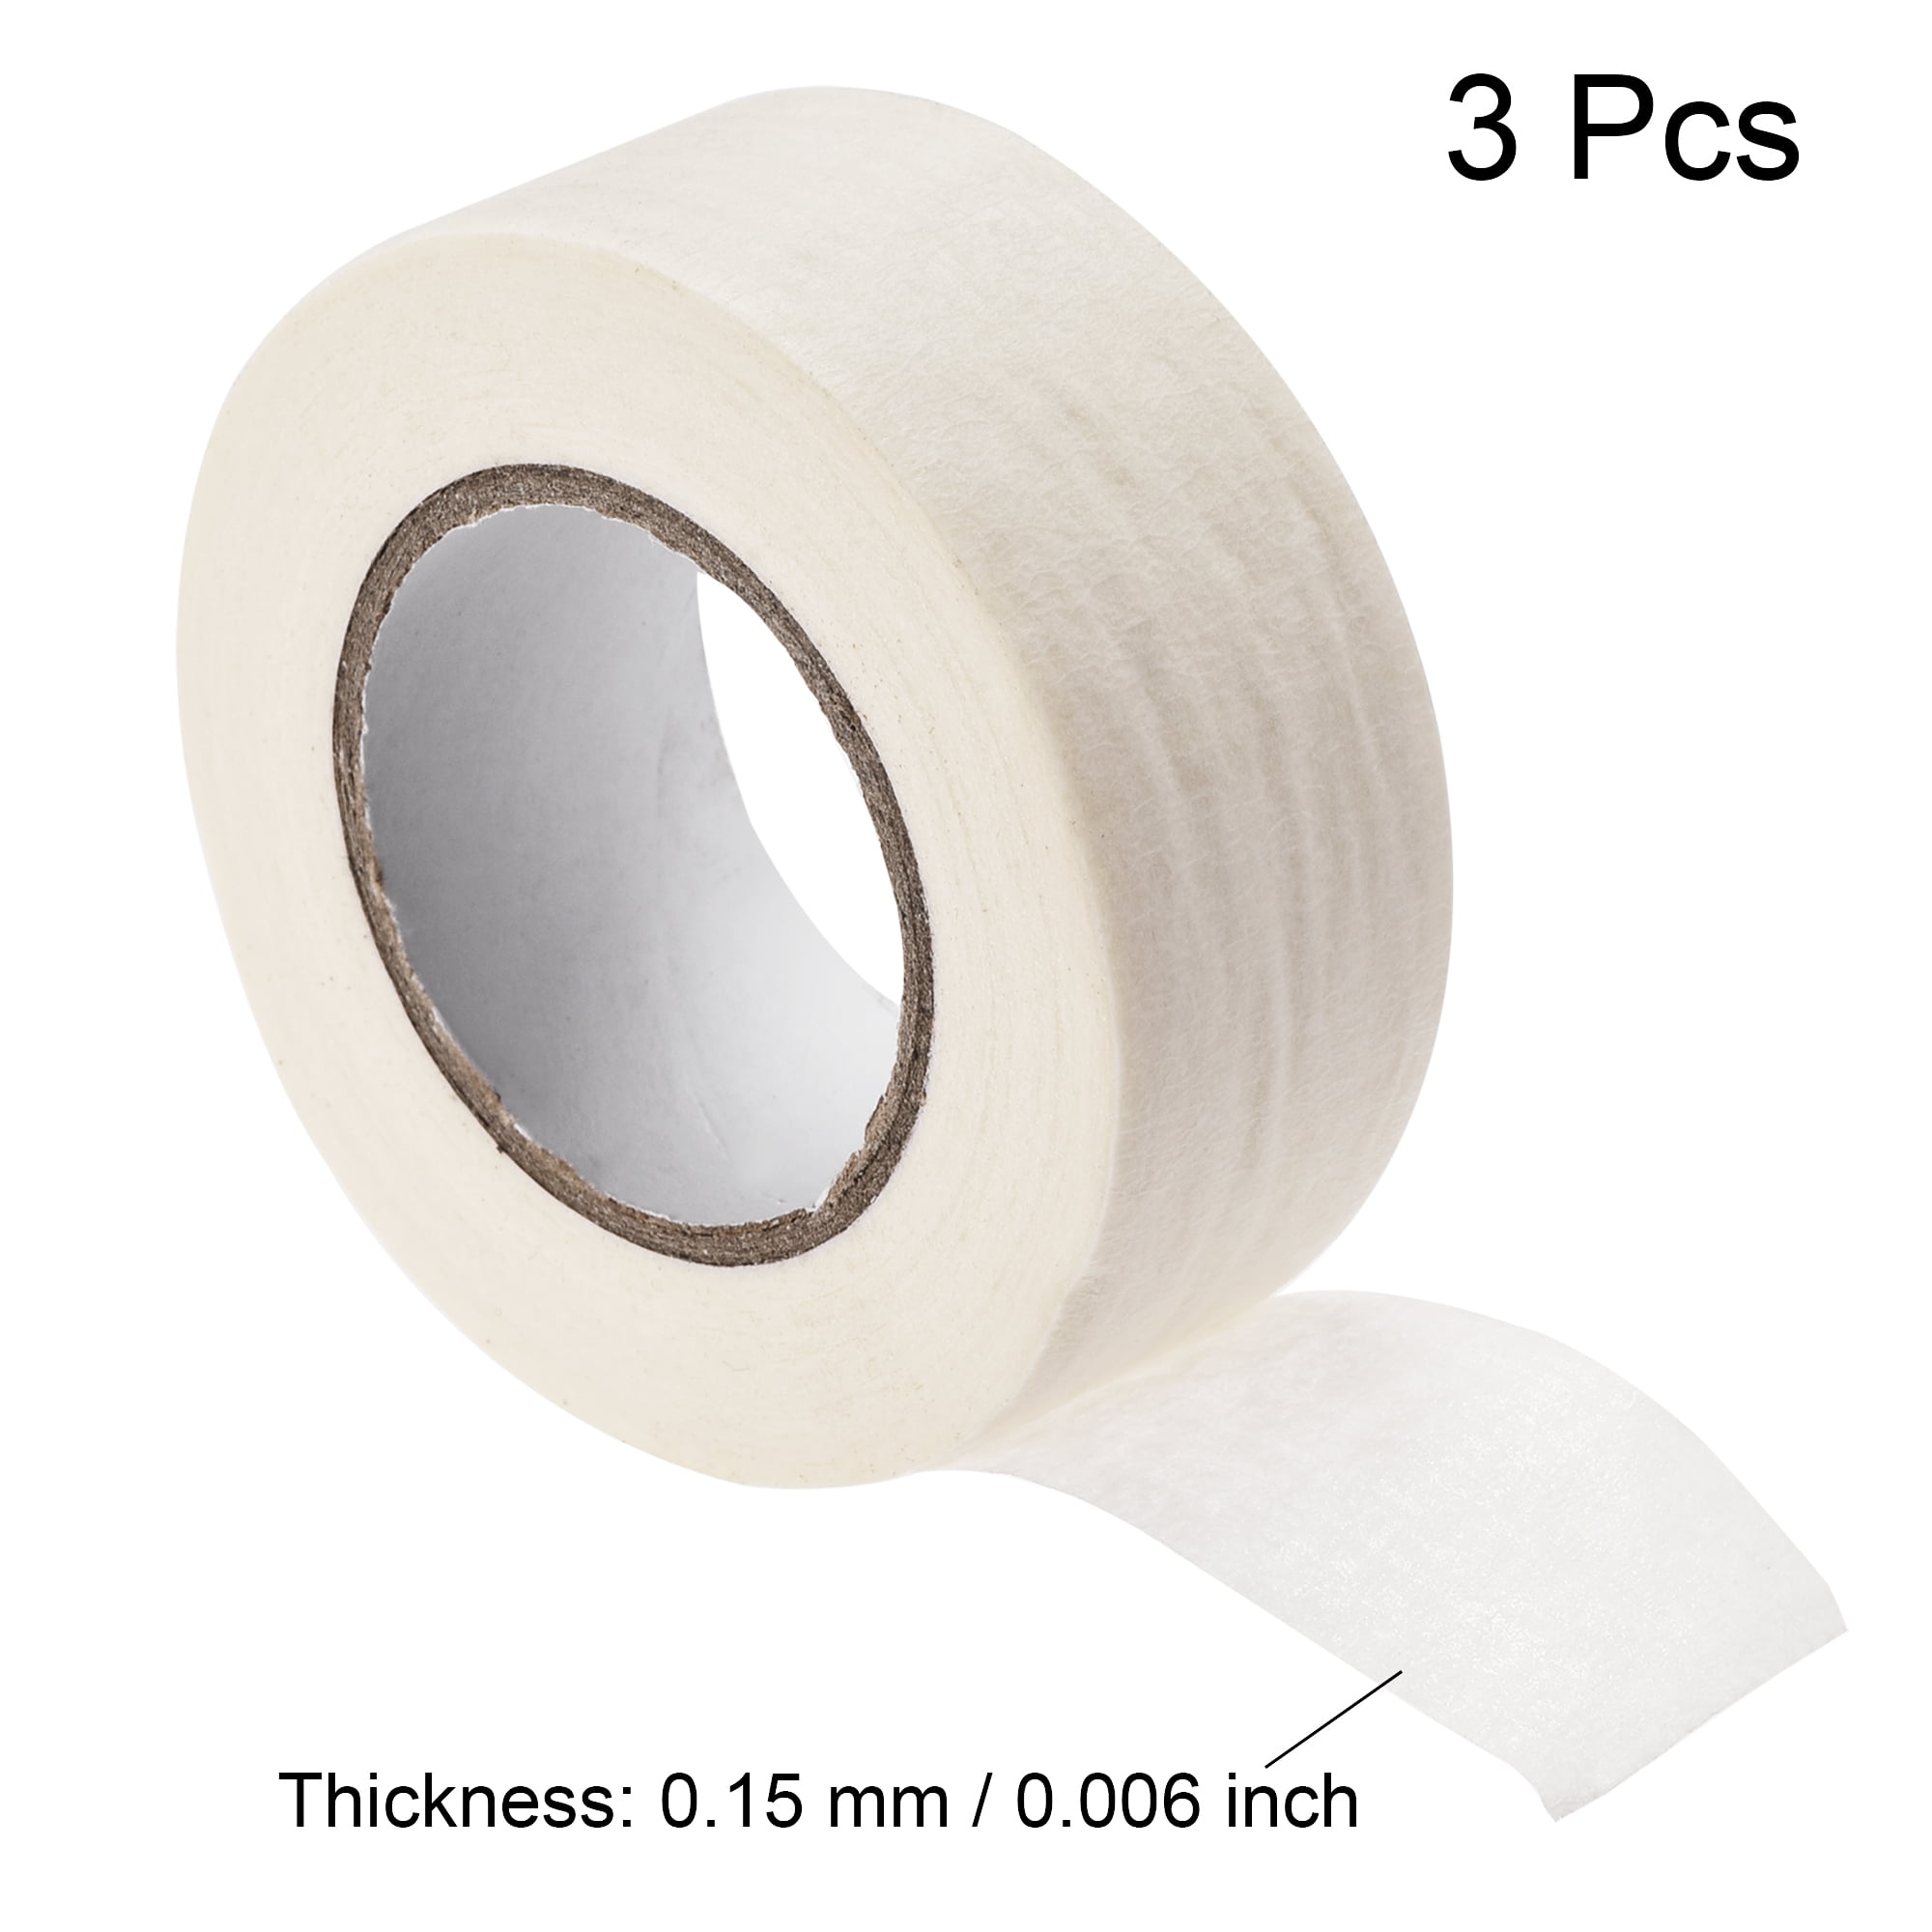 Uxcell 3pcs 25mm 1 inch Wide 20m 21 Yards Masking Tape Painters Tape Rolls White